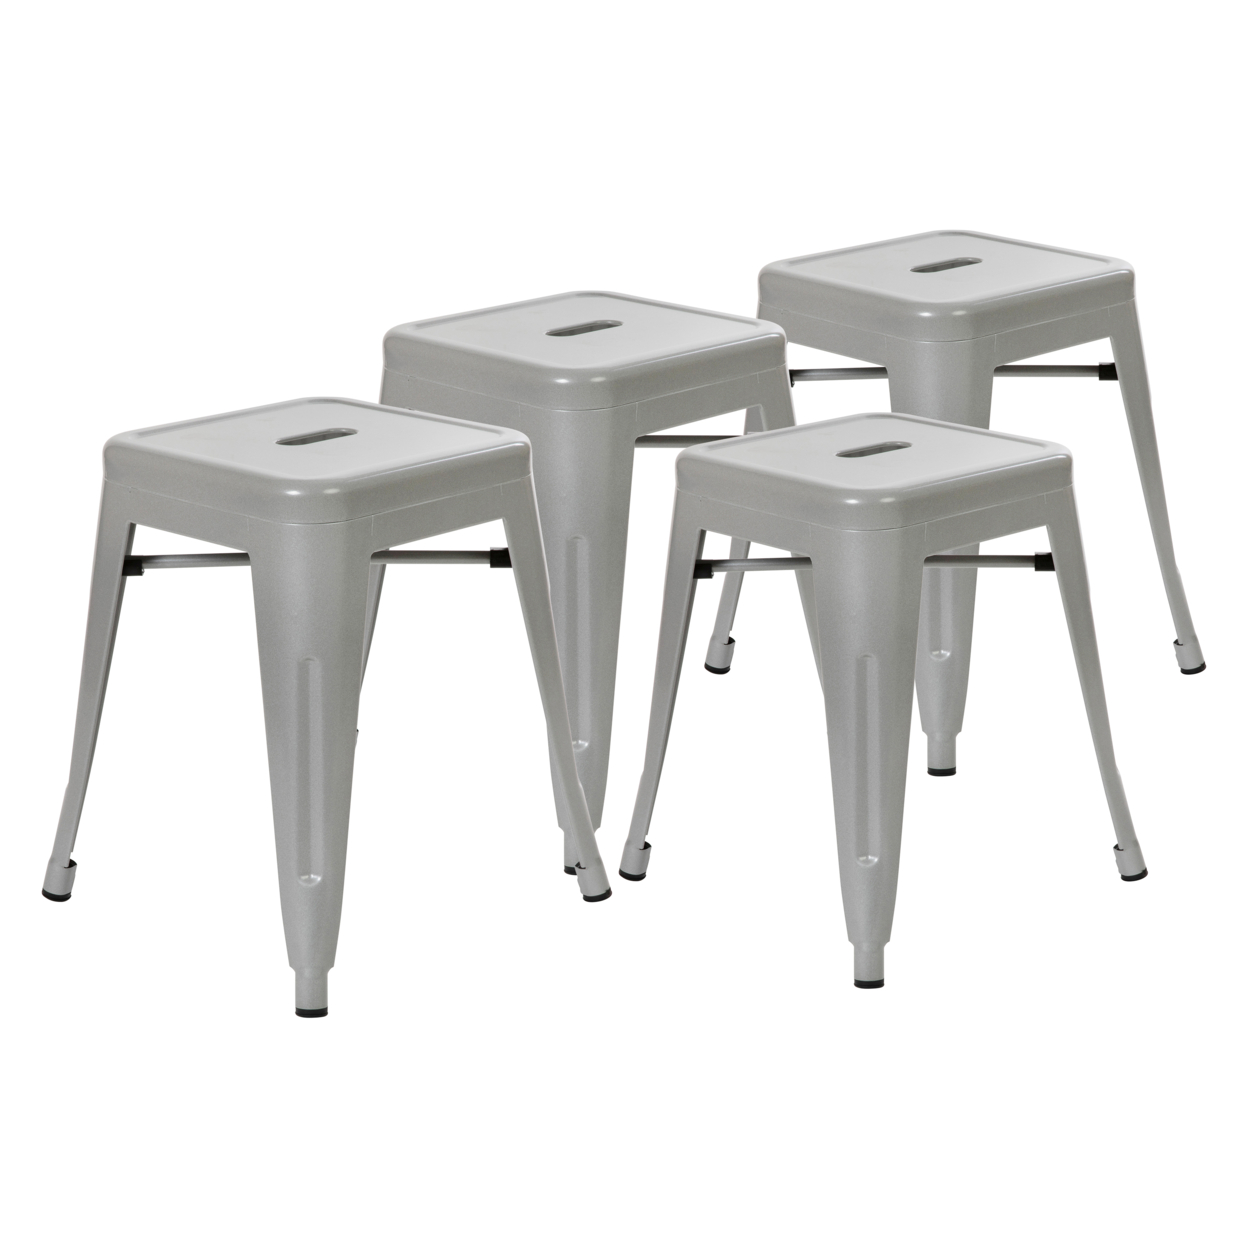 18 Table Height Stool, Stackable Backless Metal Indoor Dining Stool, Commercial Grade Restaurant Stool In Silver - Set Of 4